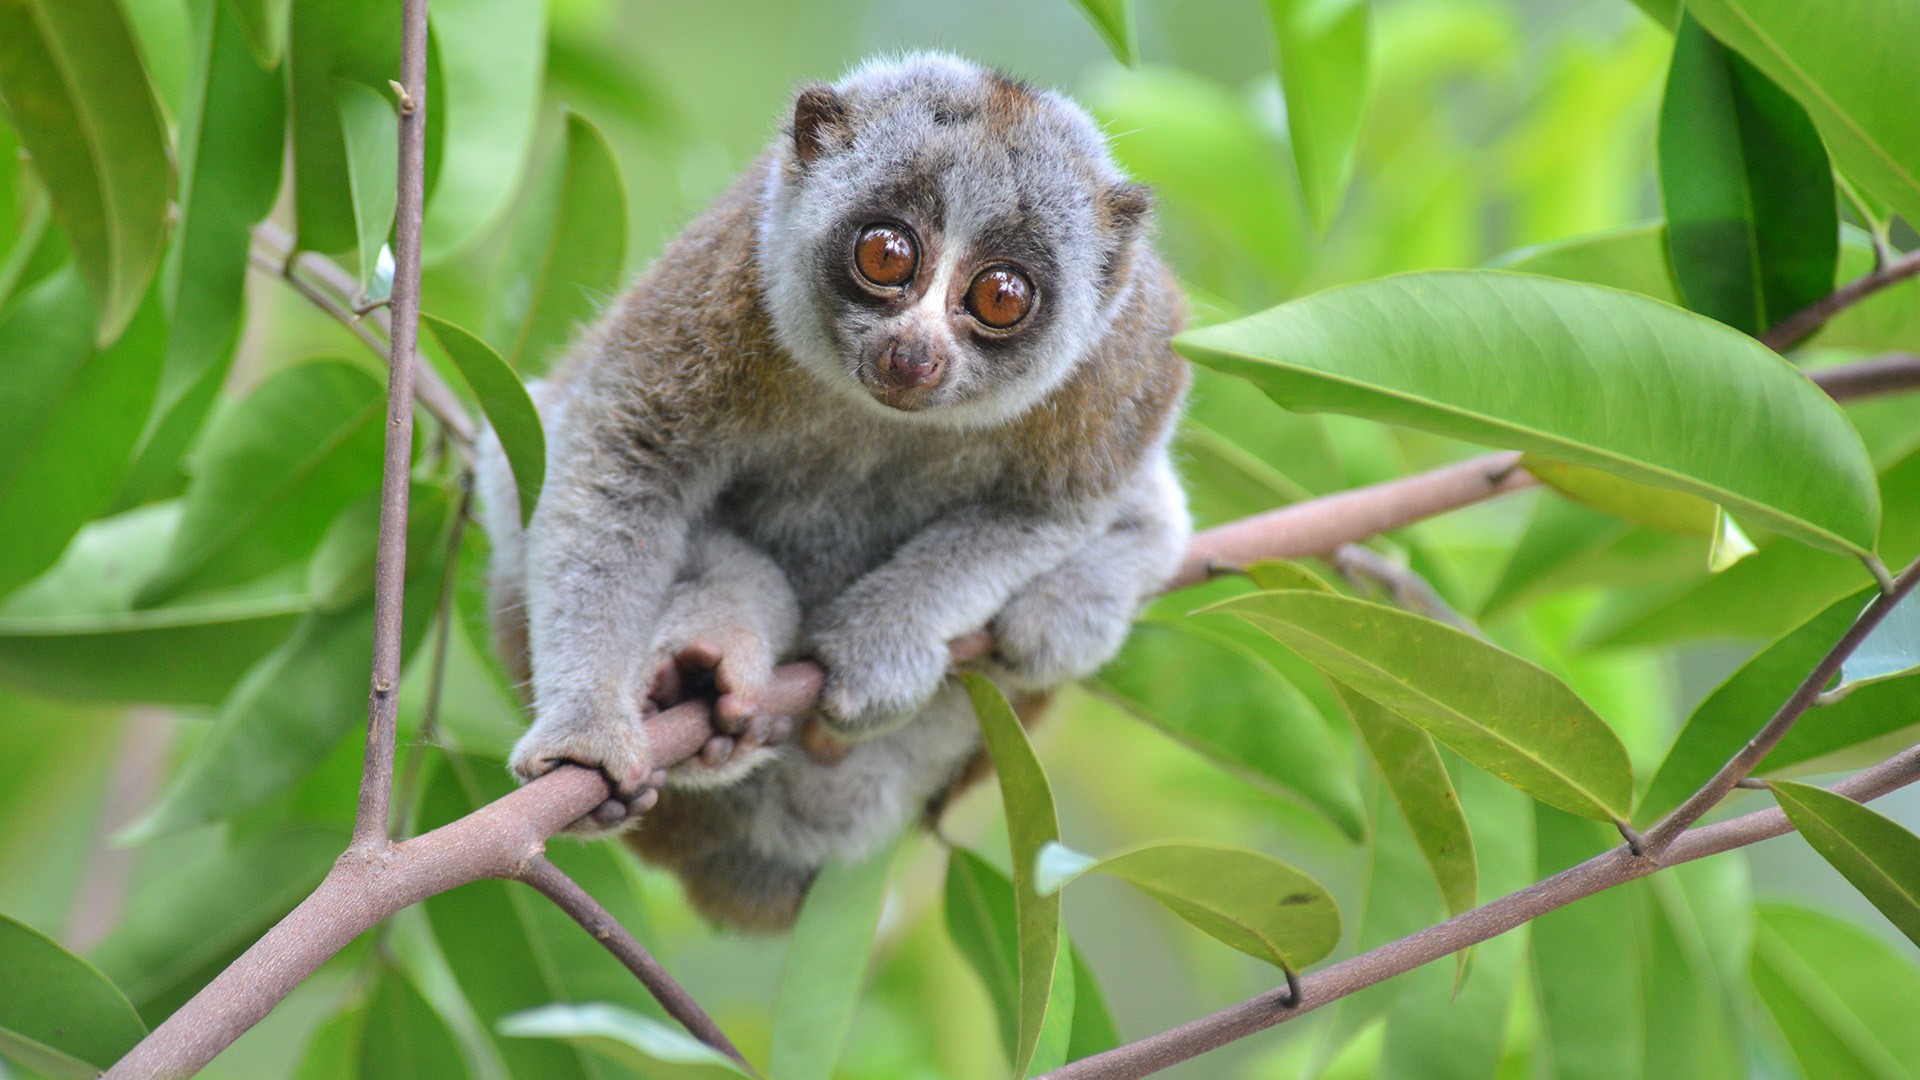 Bengal Slow Loris in tropical forest, South East Asia | Windows 10  Spotlight Images